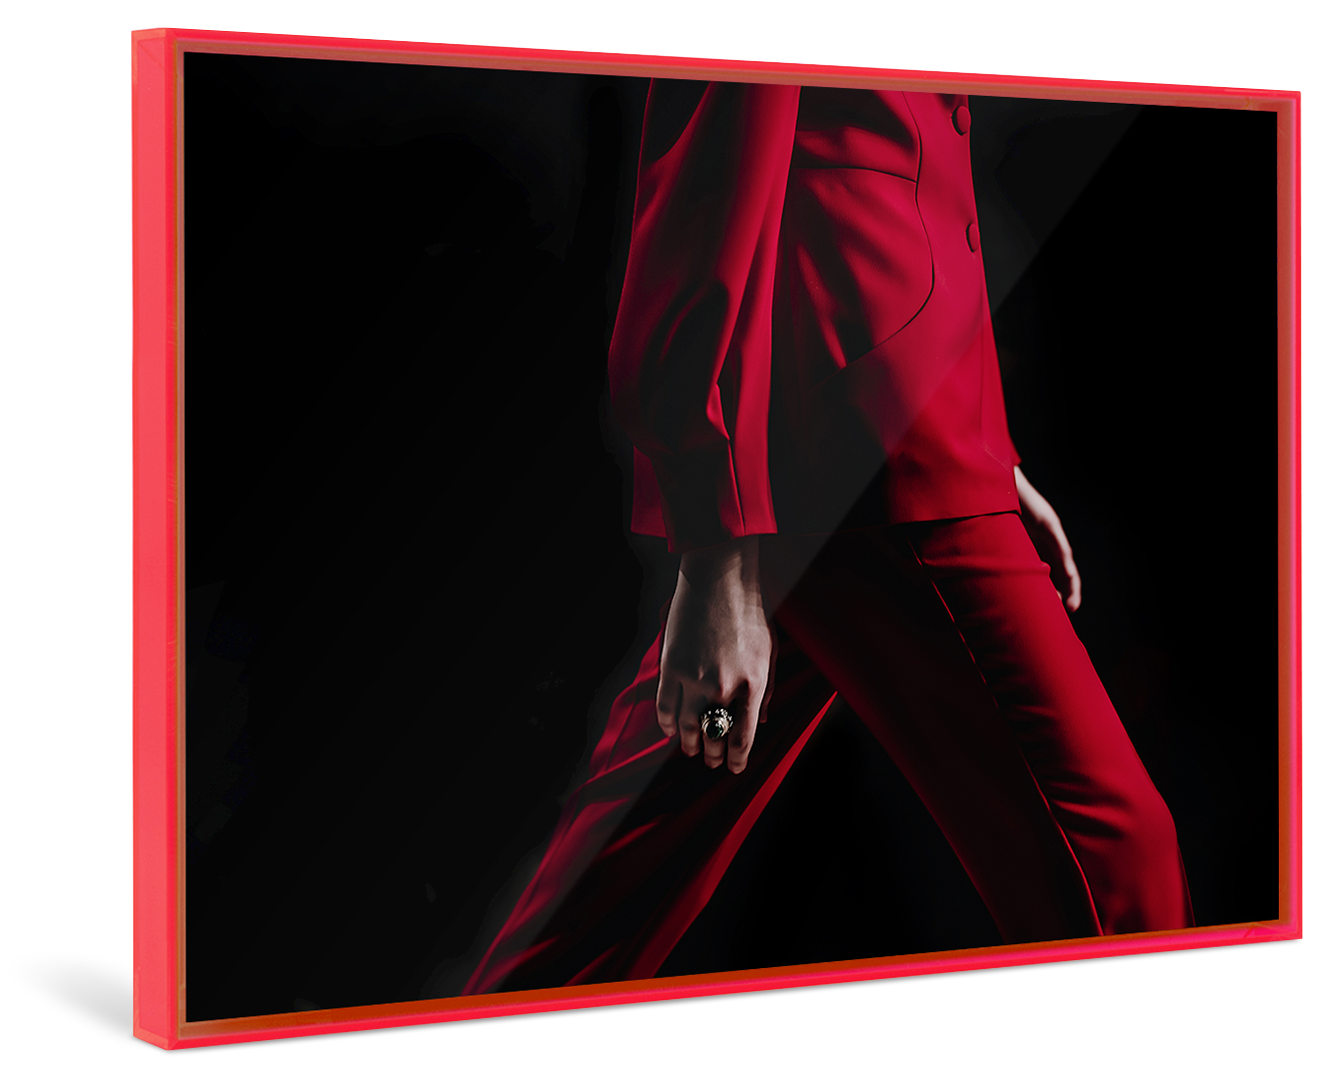 A person in a red suit walks in front of a black background framed in a red Pop Art Frame.